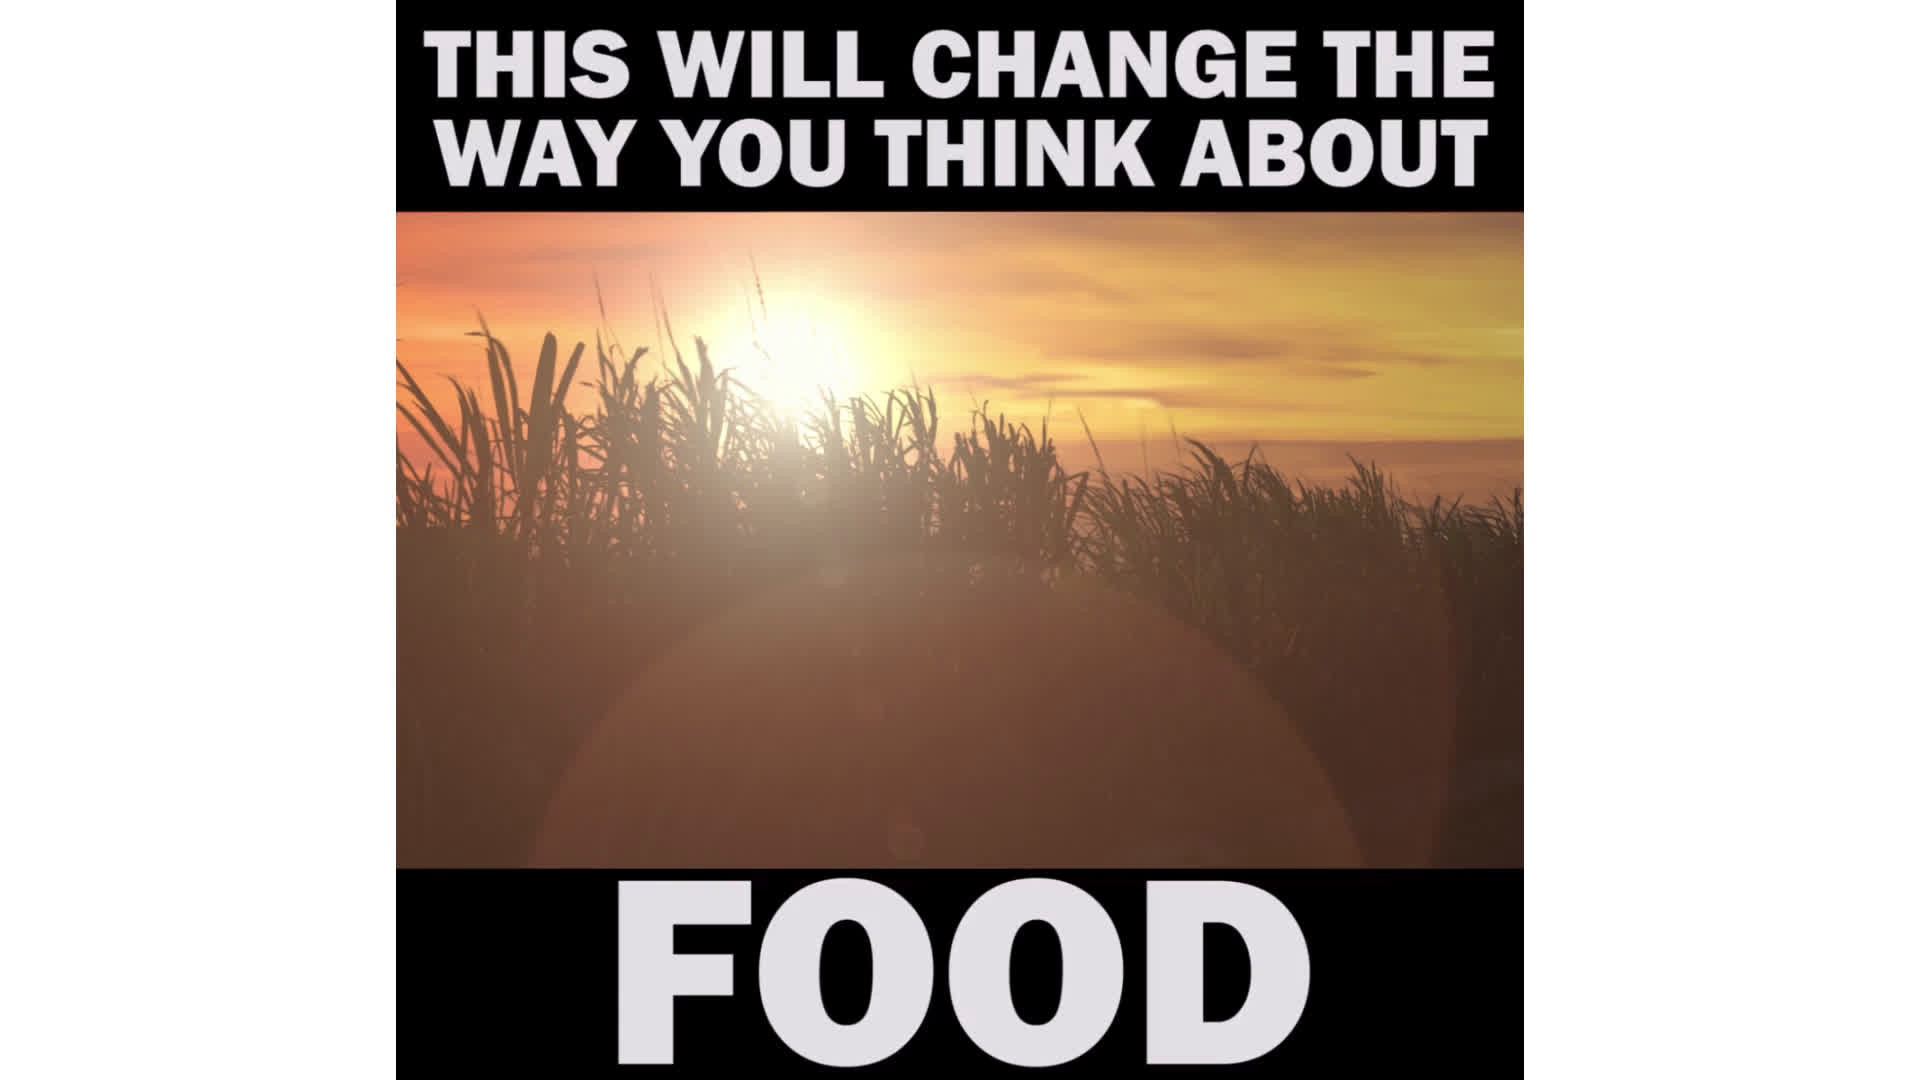 SAVE THE FOOD: Change The Way You Think About Food